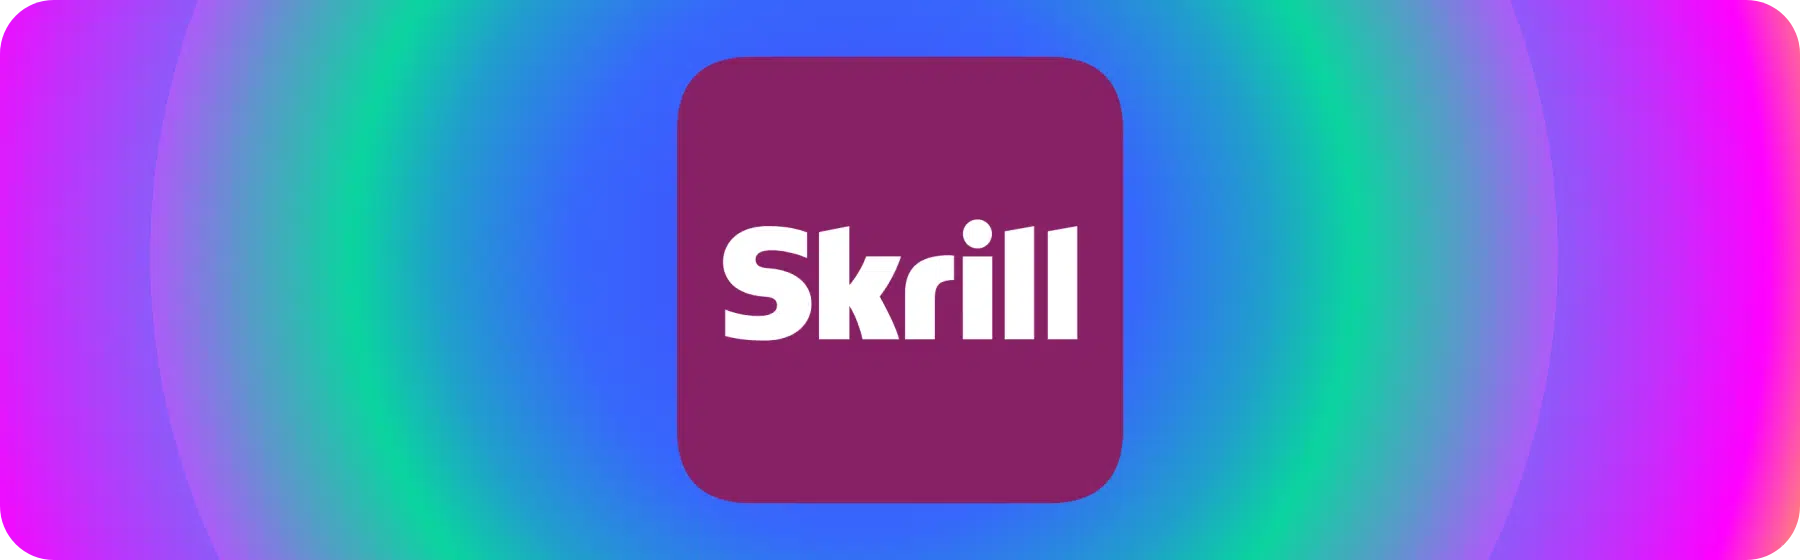 picture of skrill logo 